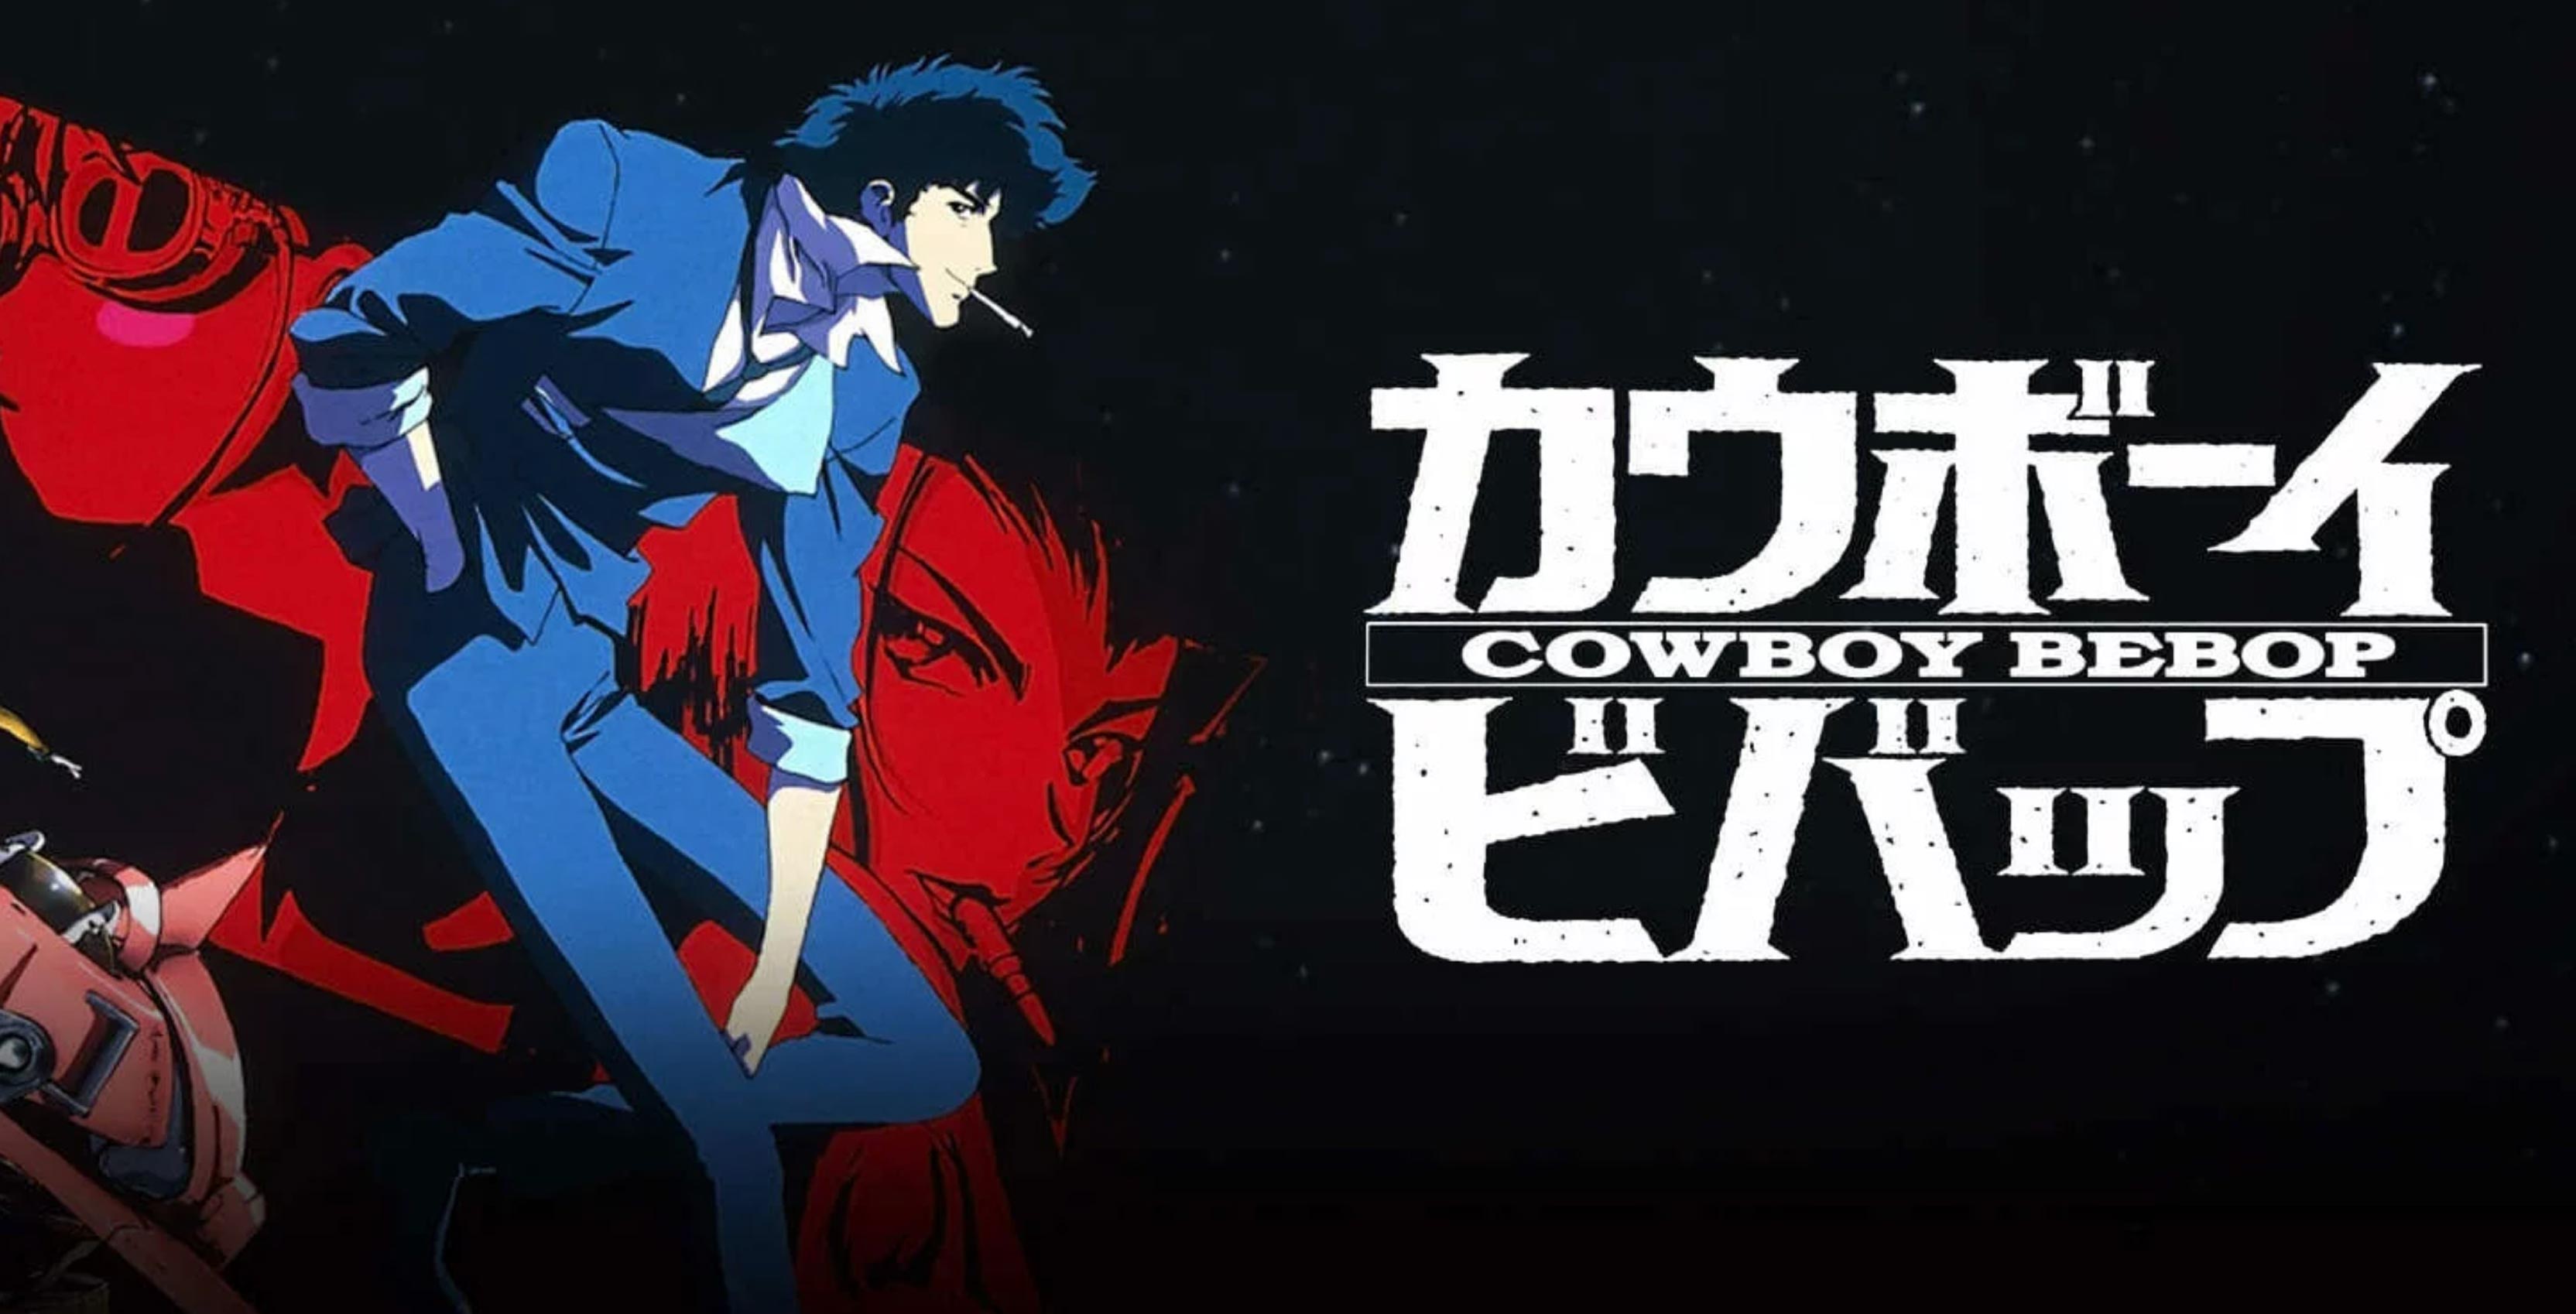 Netflix is turning Cowboy Bebop into a live action series